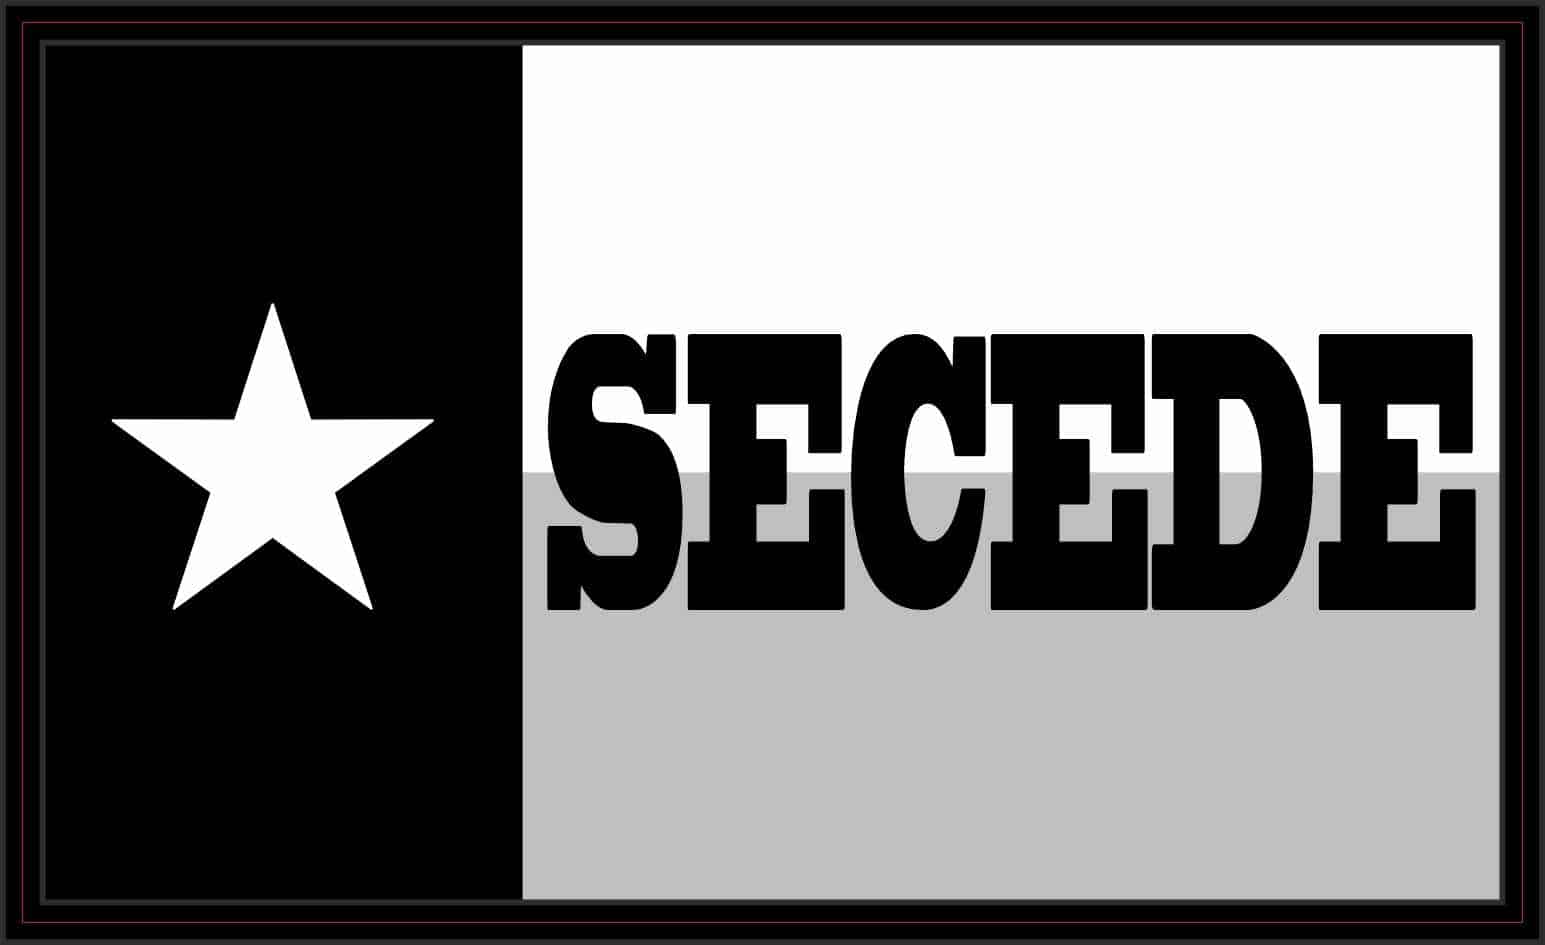 Black and White Texas Flag Secede Sticker Car Truck Vehicle Bumper Decal